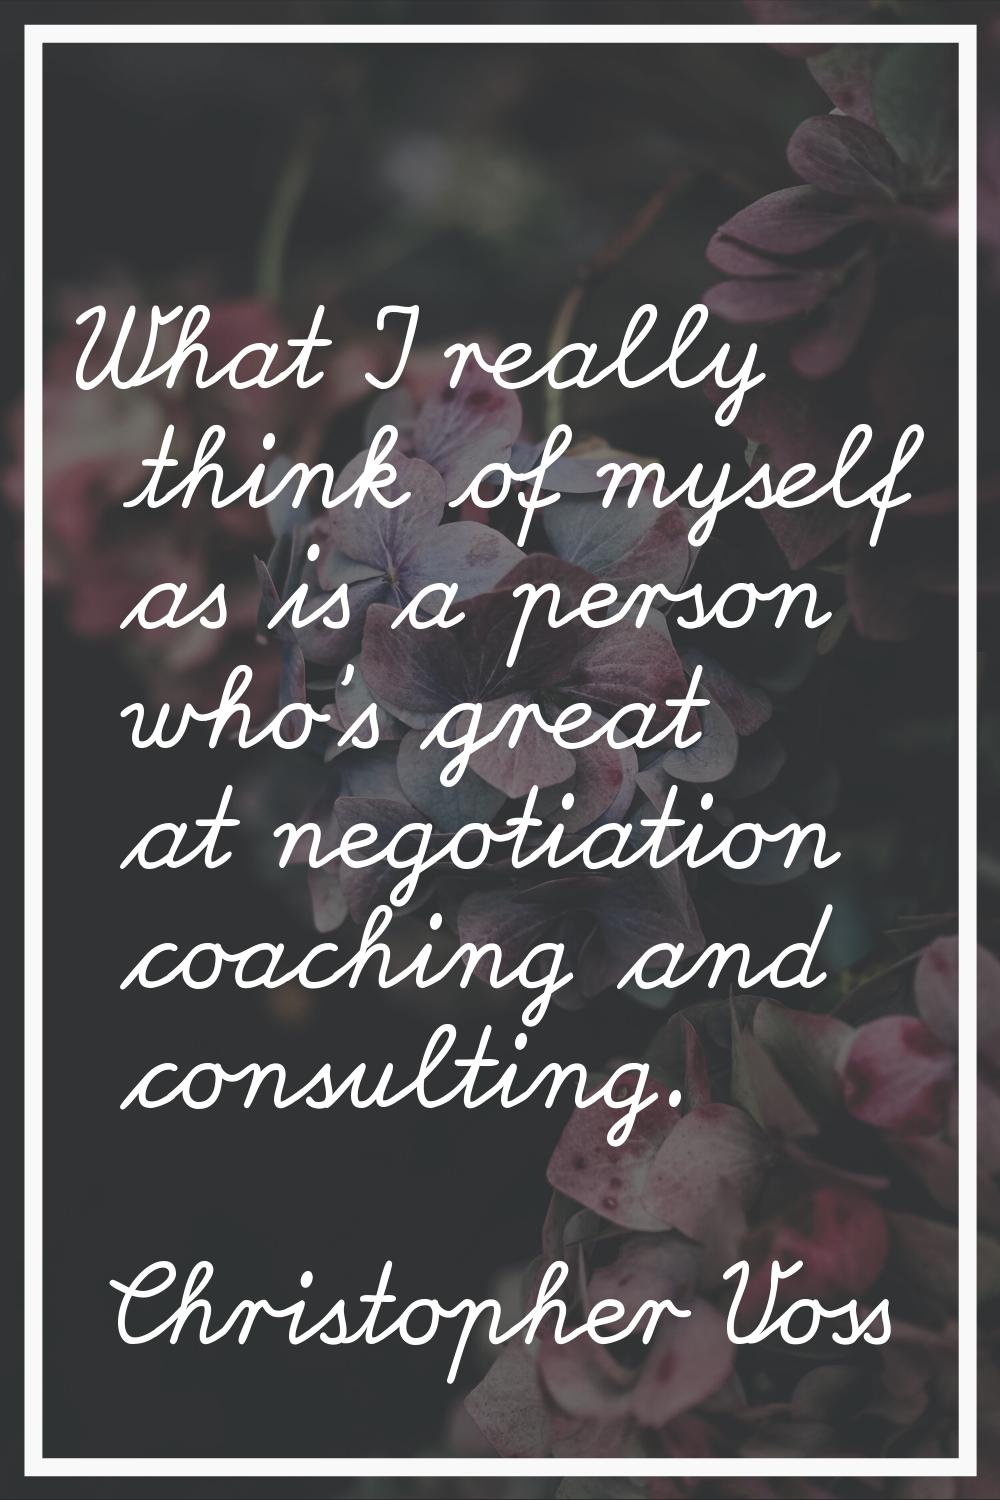 What I really think of myself as is a person who's great at negotiation coaching and consulting.